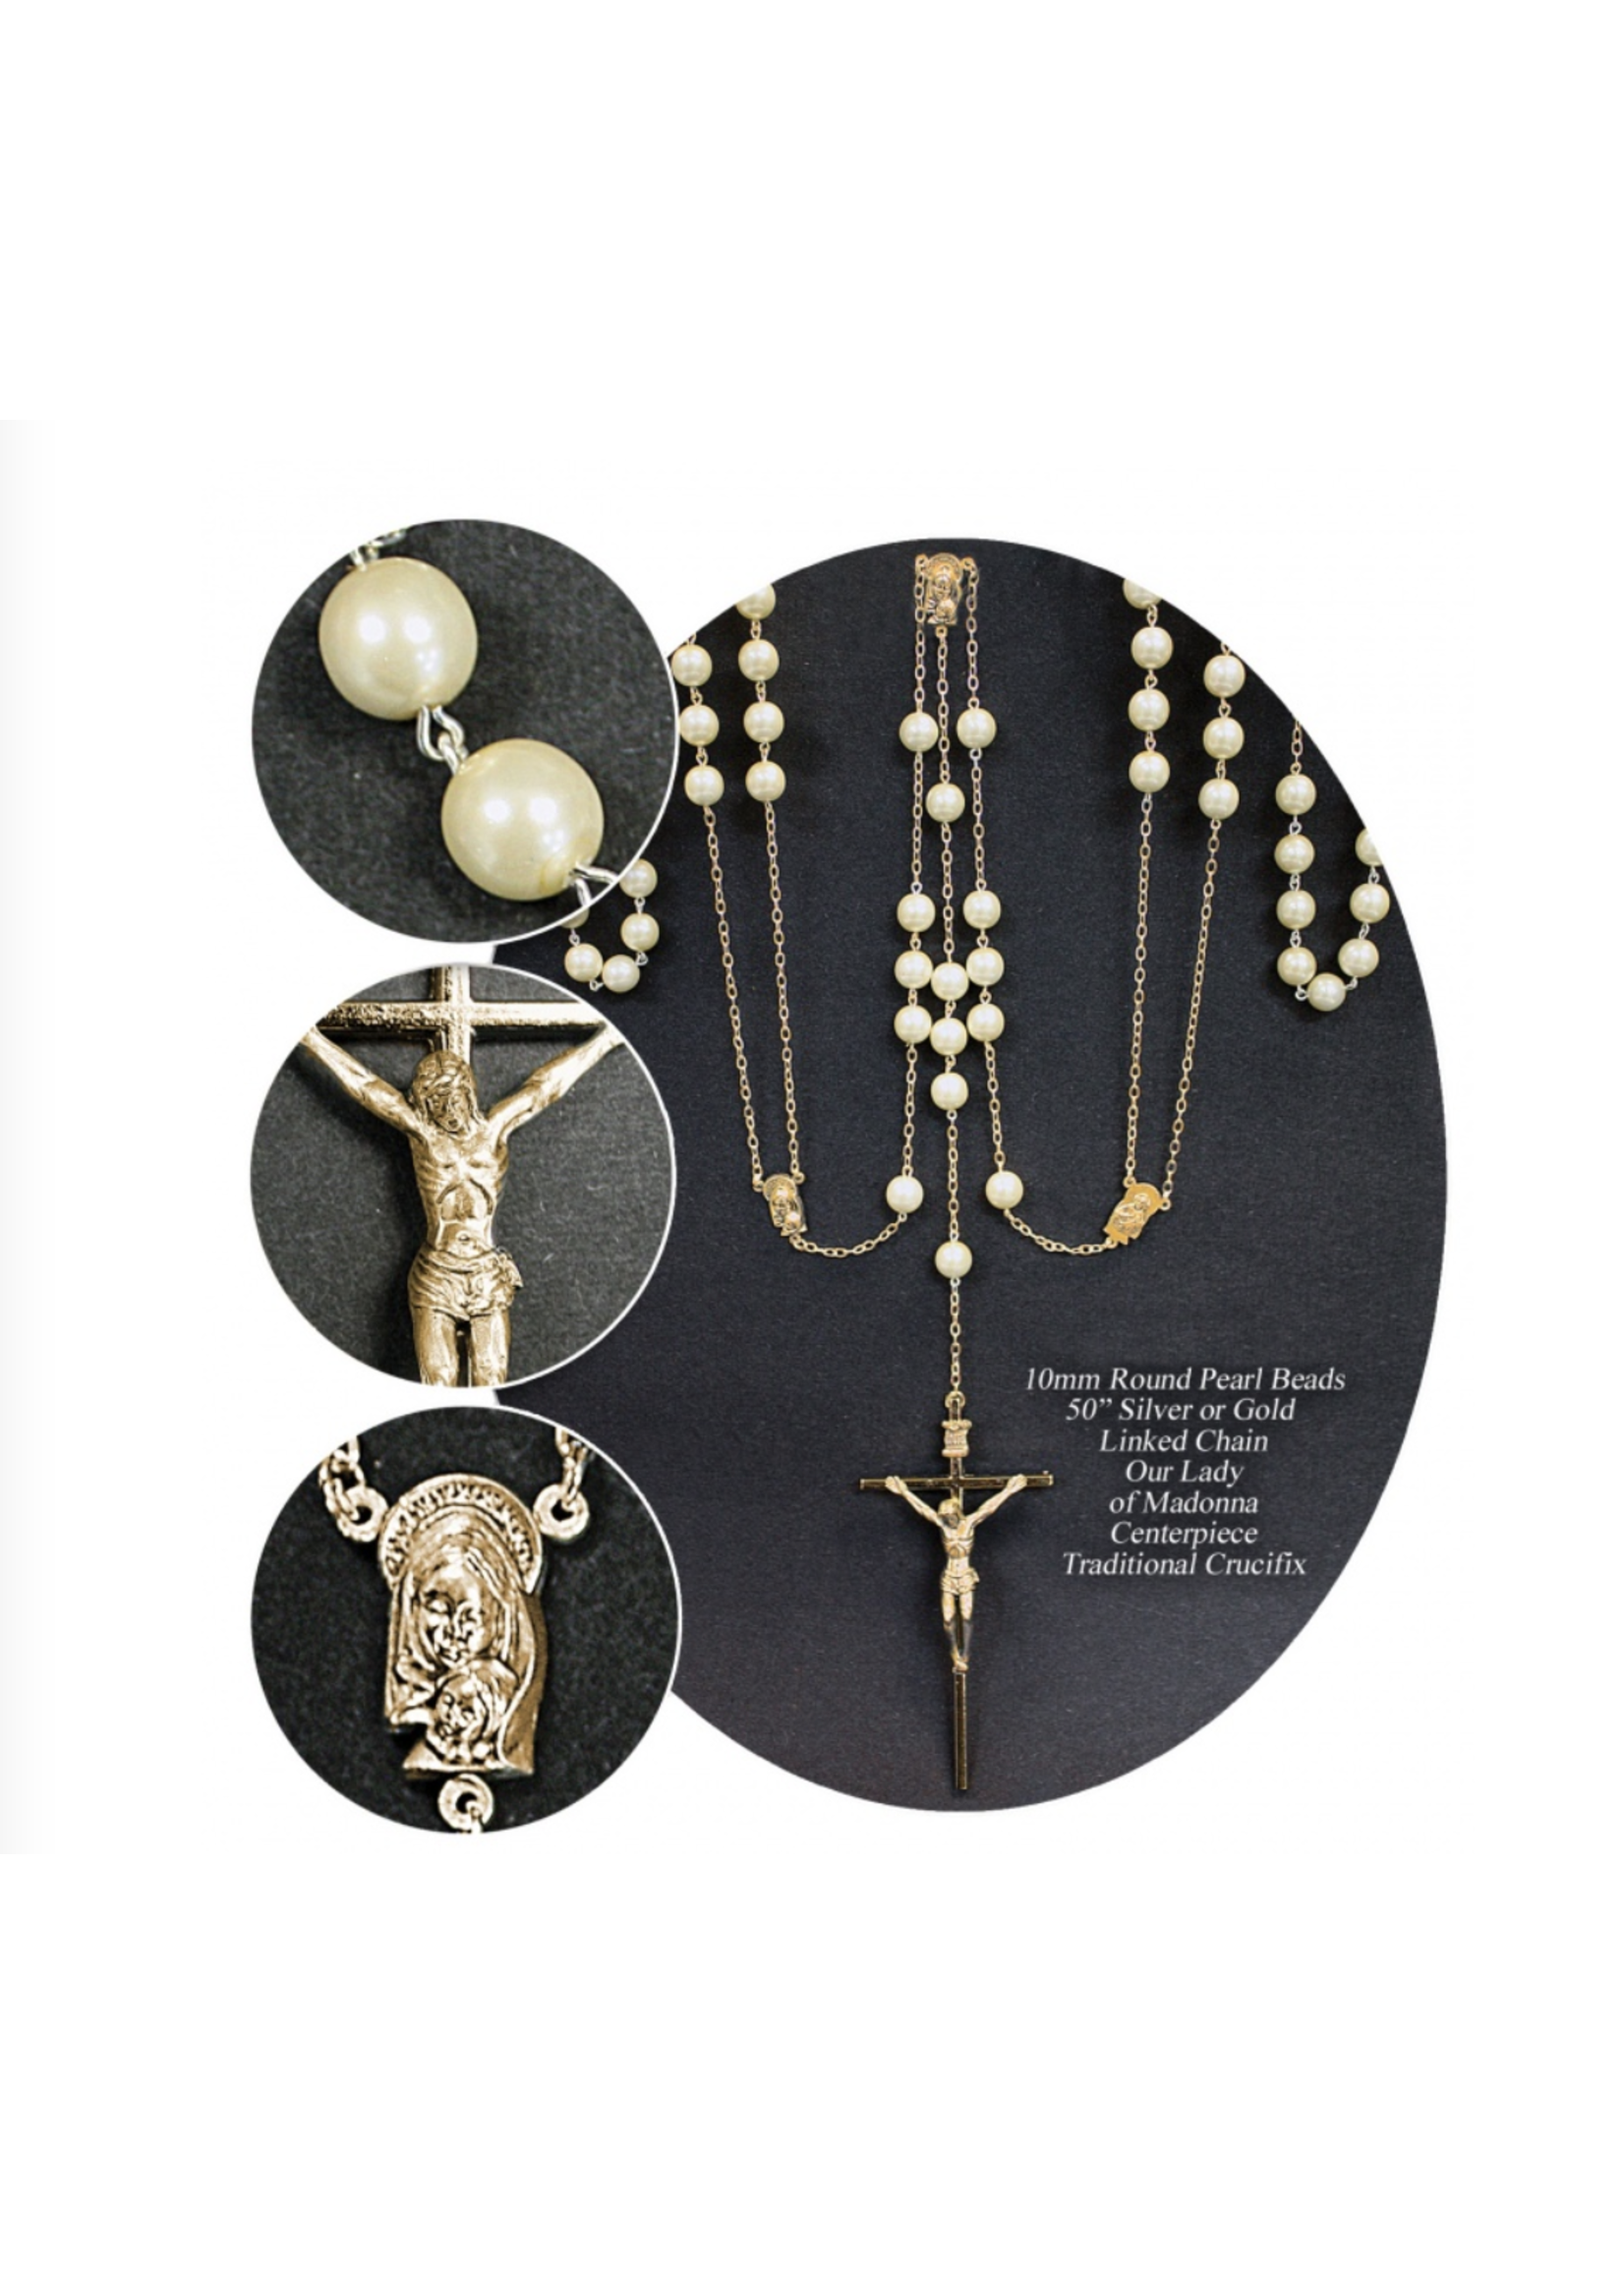 Pearl Rosary Wedding Lasso with gold-tone Crucifix